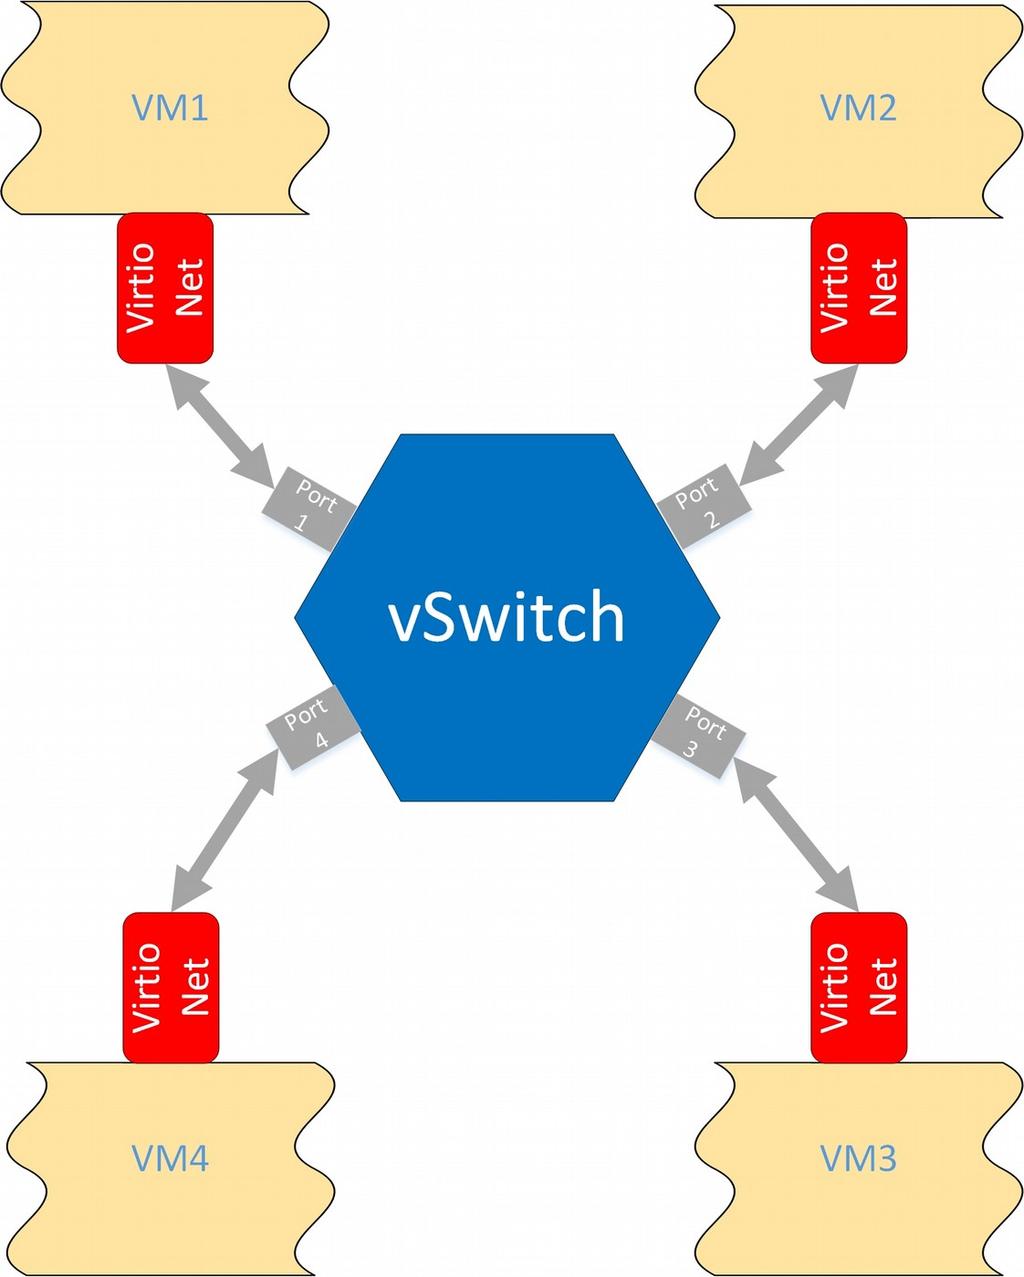 Existing Inter-VM Network Packet Transmission Long Code Path: packets are transmitted from one VM to another via an